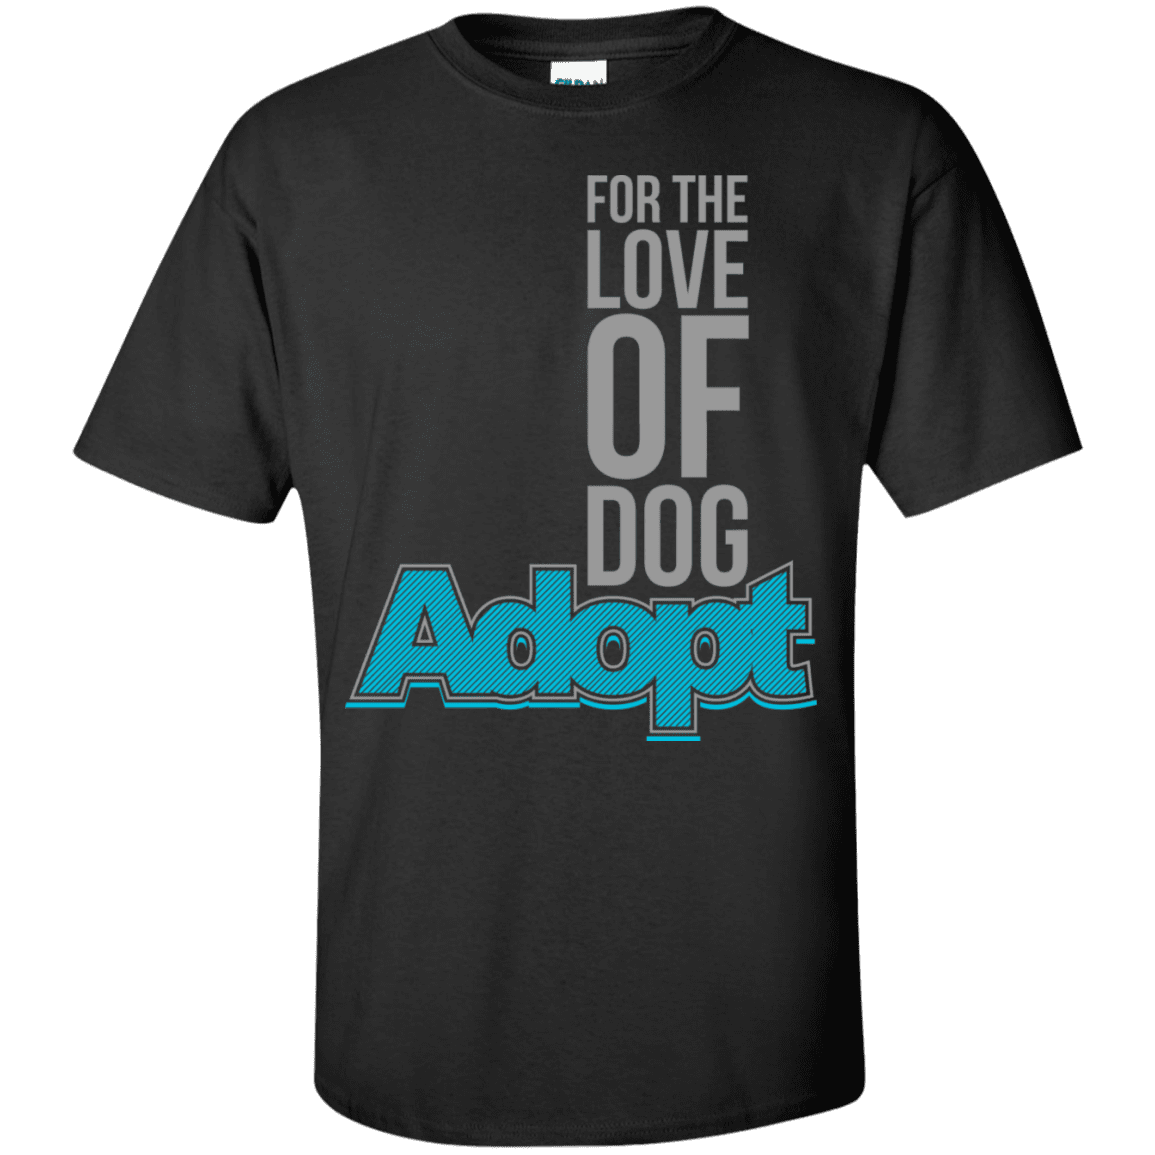 For The Love Of Dog Adopt - T Shirt – Rescuers Club